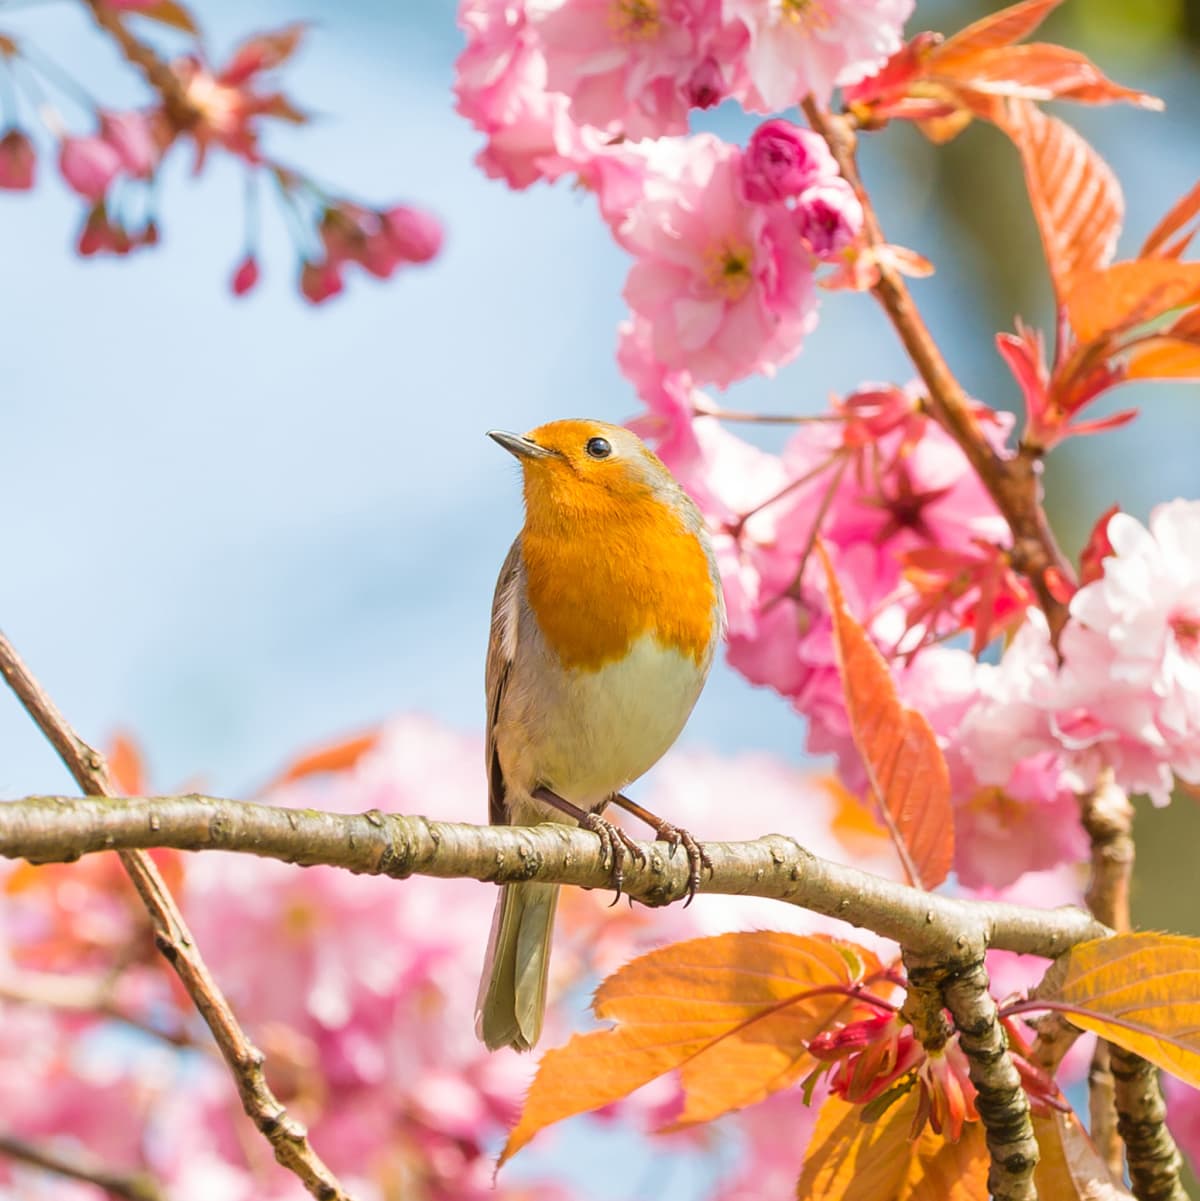 A yellow bird perched on a cherry blossom branch